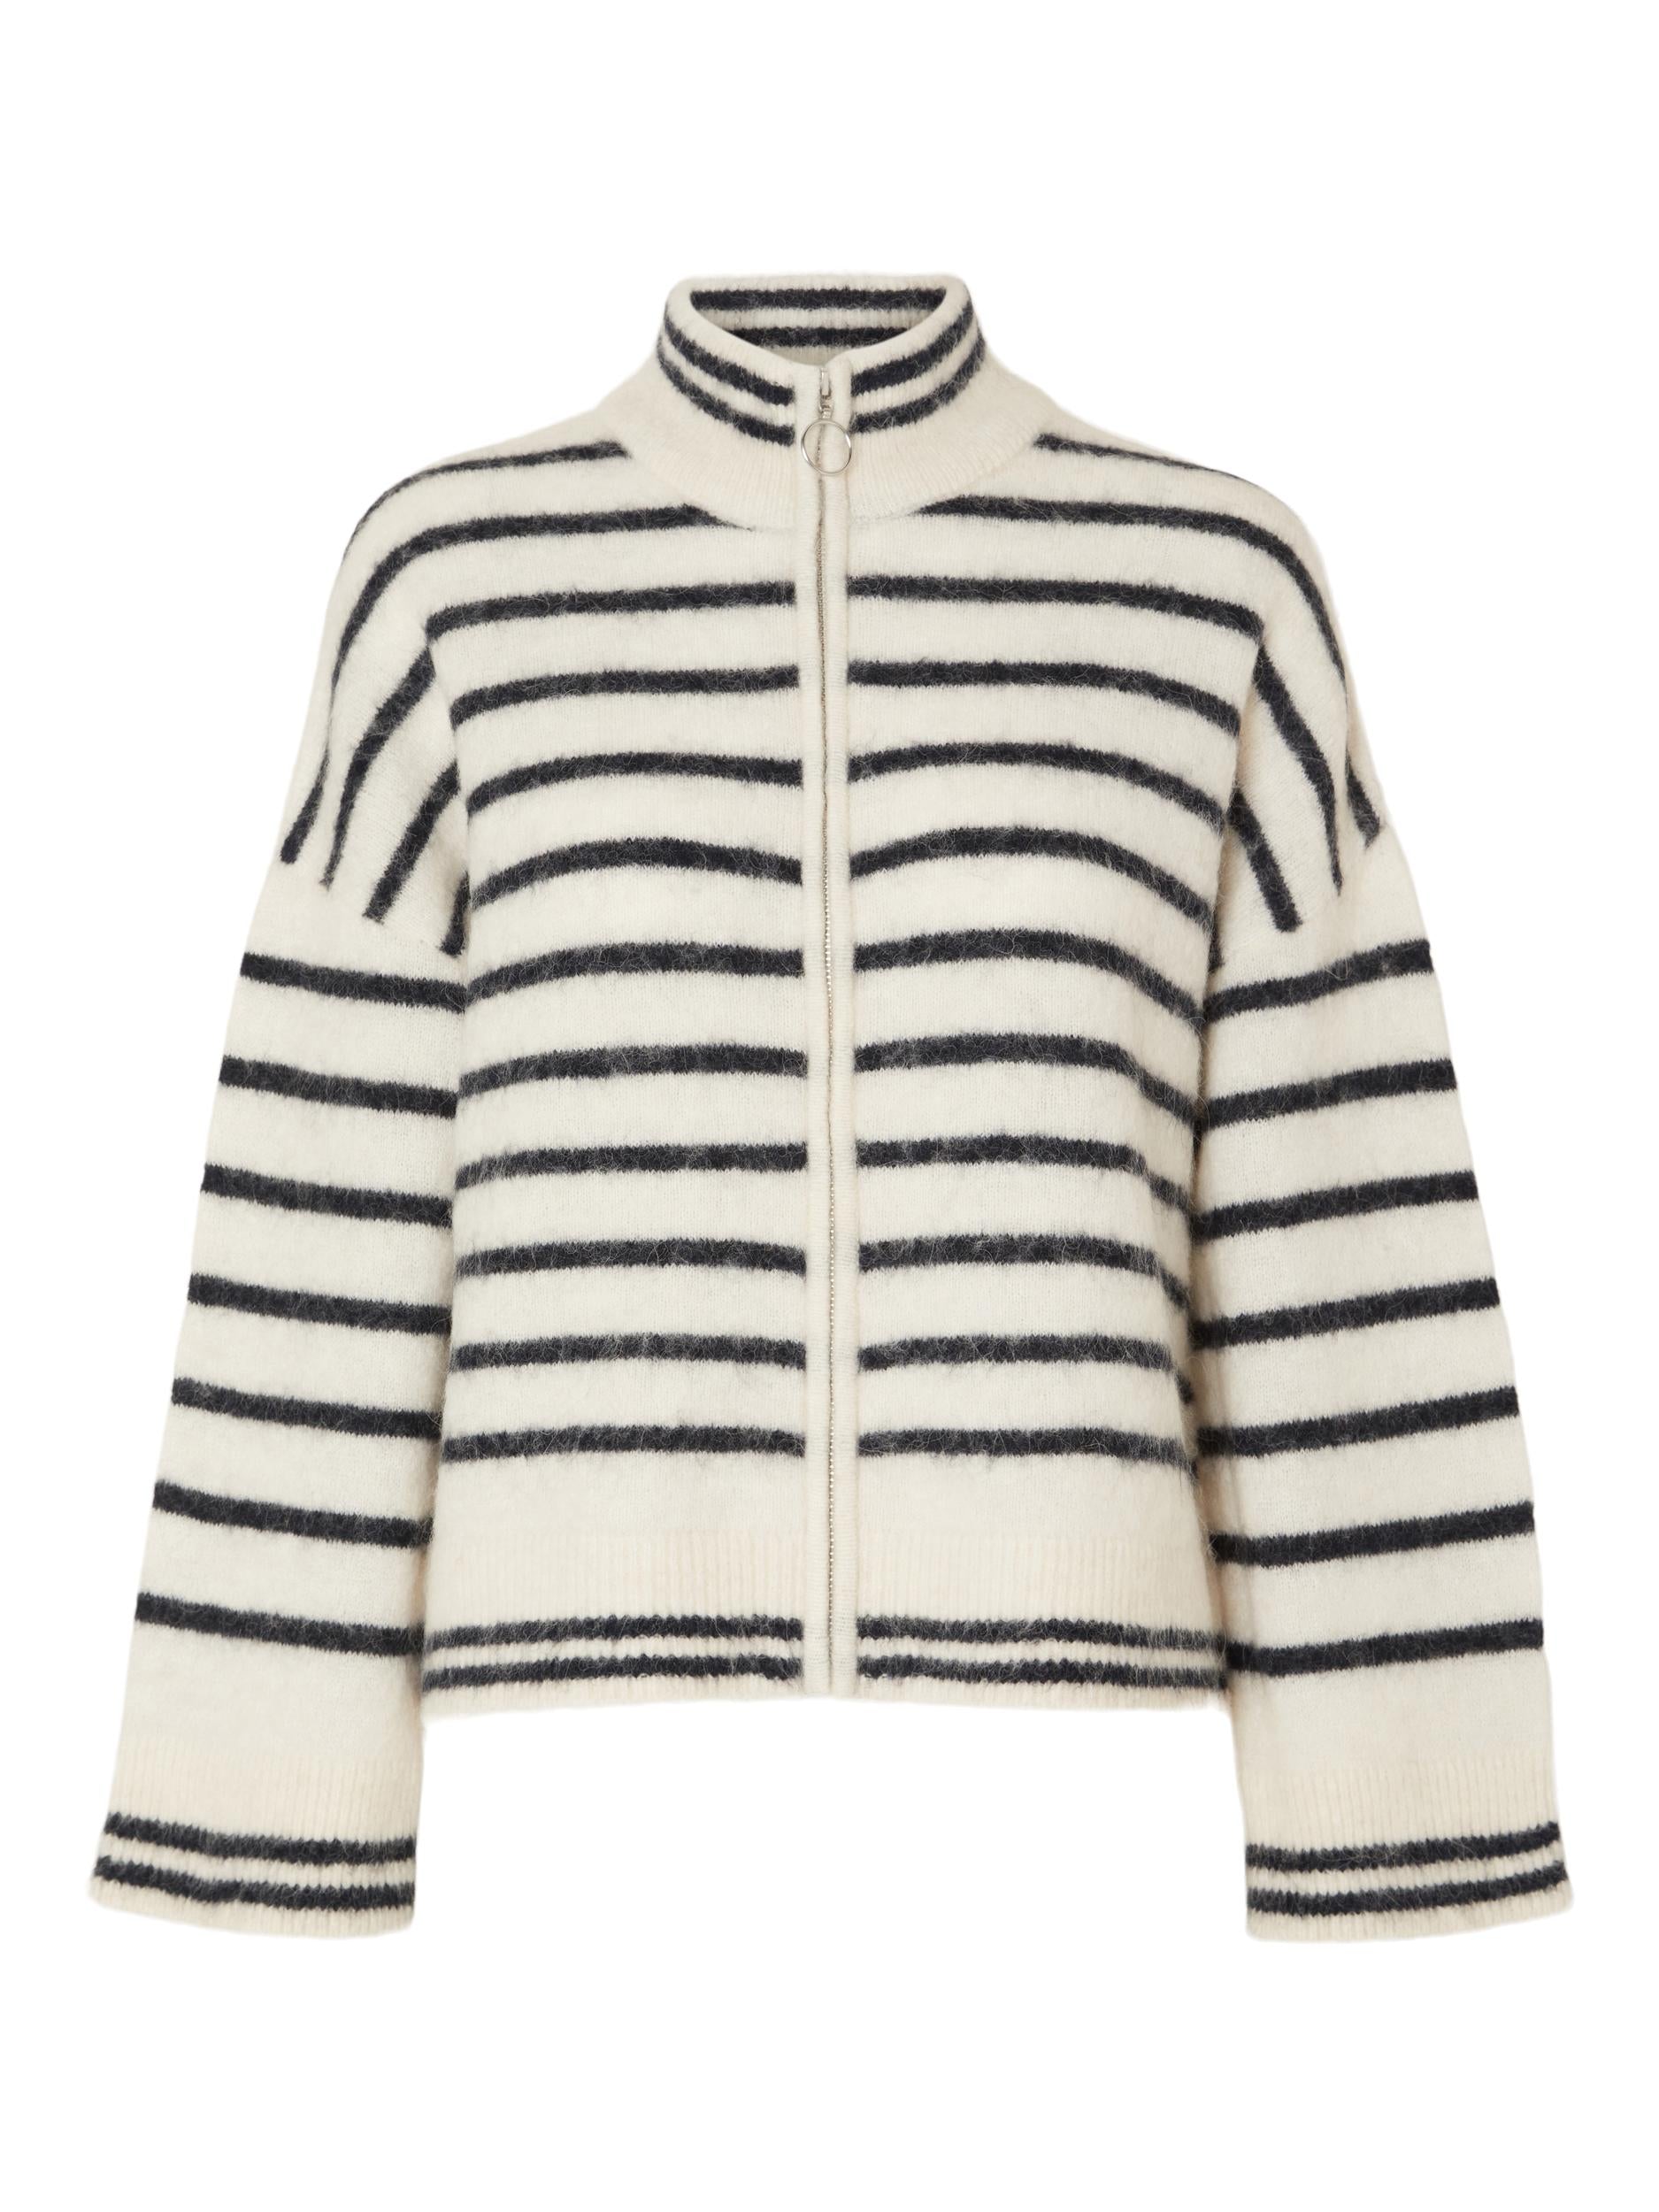 Selected Femme "Sia" Knit Cardigan birch/navy